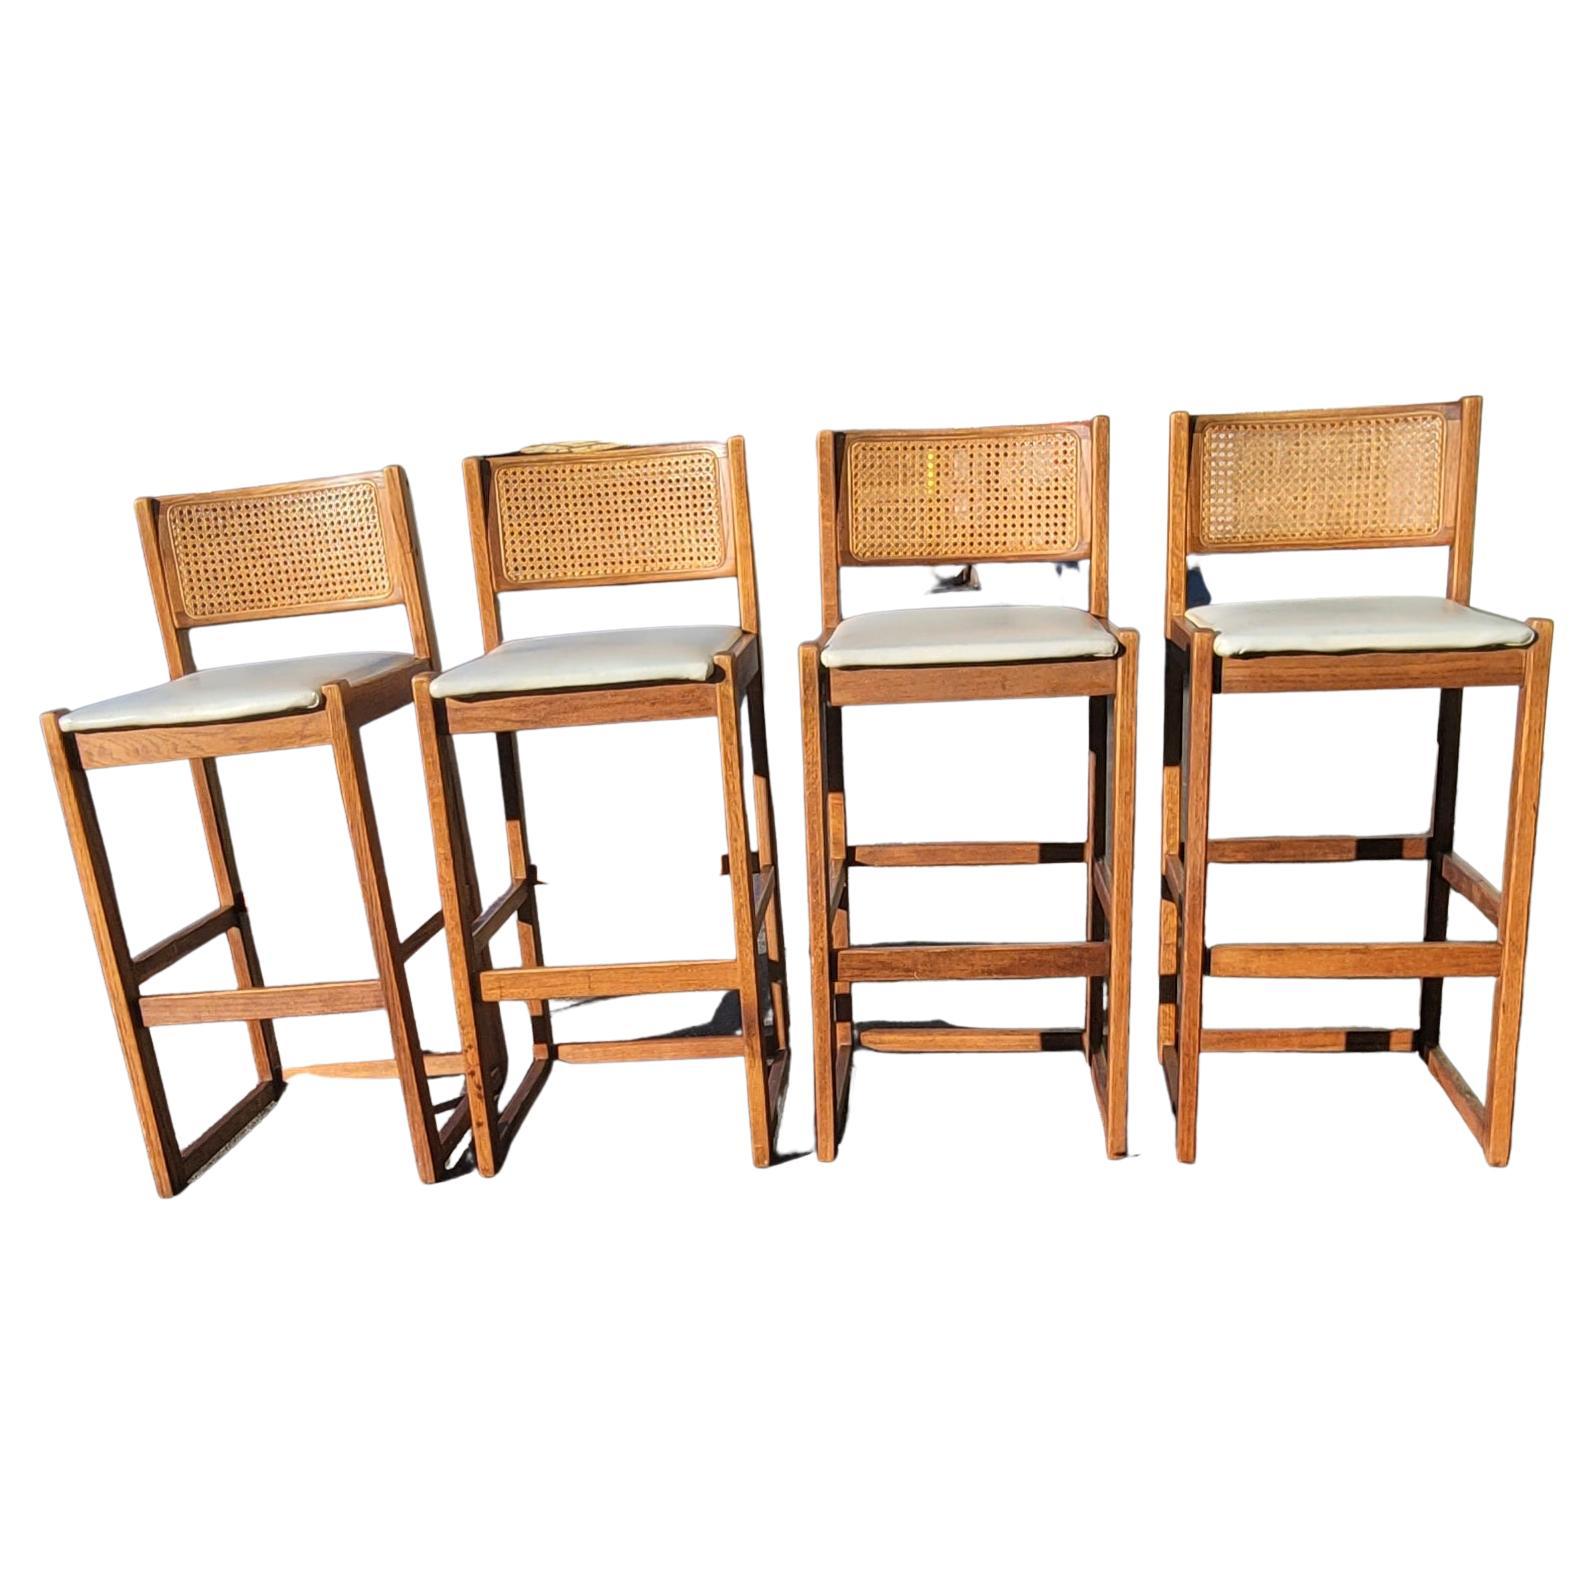 A set four (4) 1970s Whitaker Furniture Oak and Cane Back with Leatherette Seat Bar Stools in good vintage condition. Measure 17